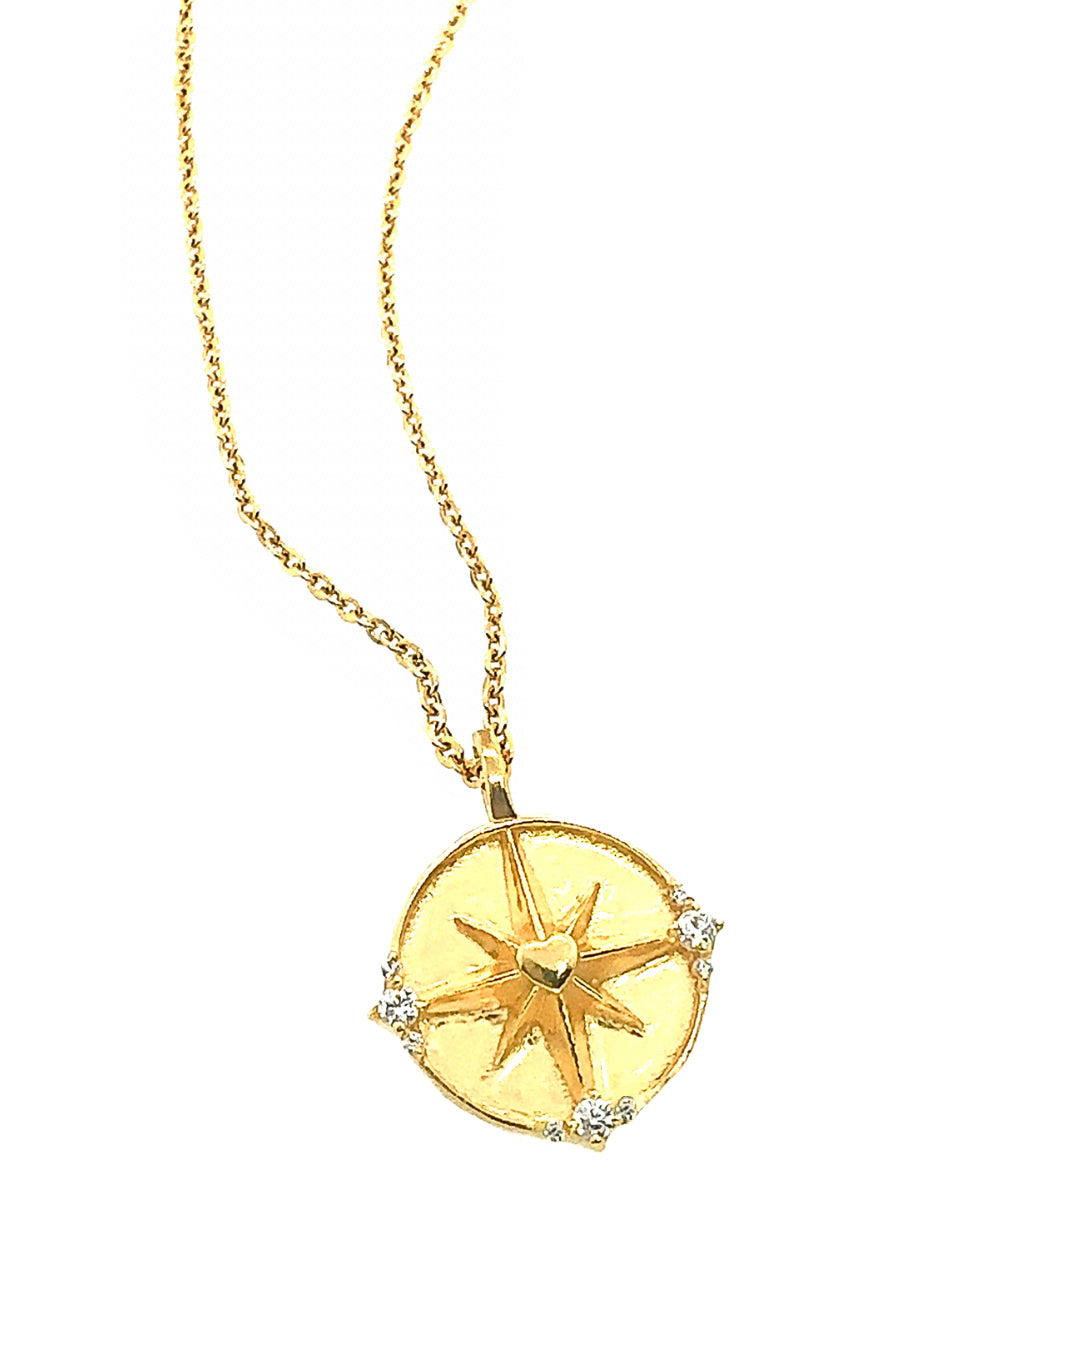 14k gold fill dreamers pendant on a necklace chain featuring a love heart centre on a North Star 